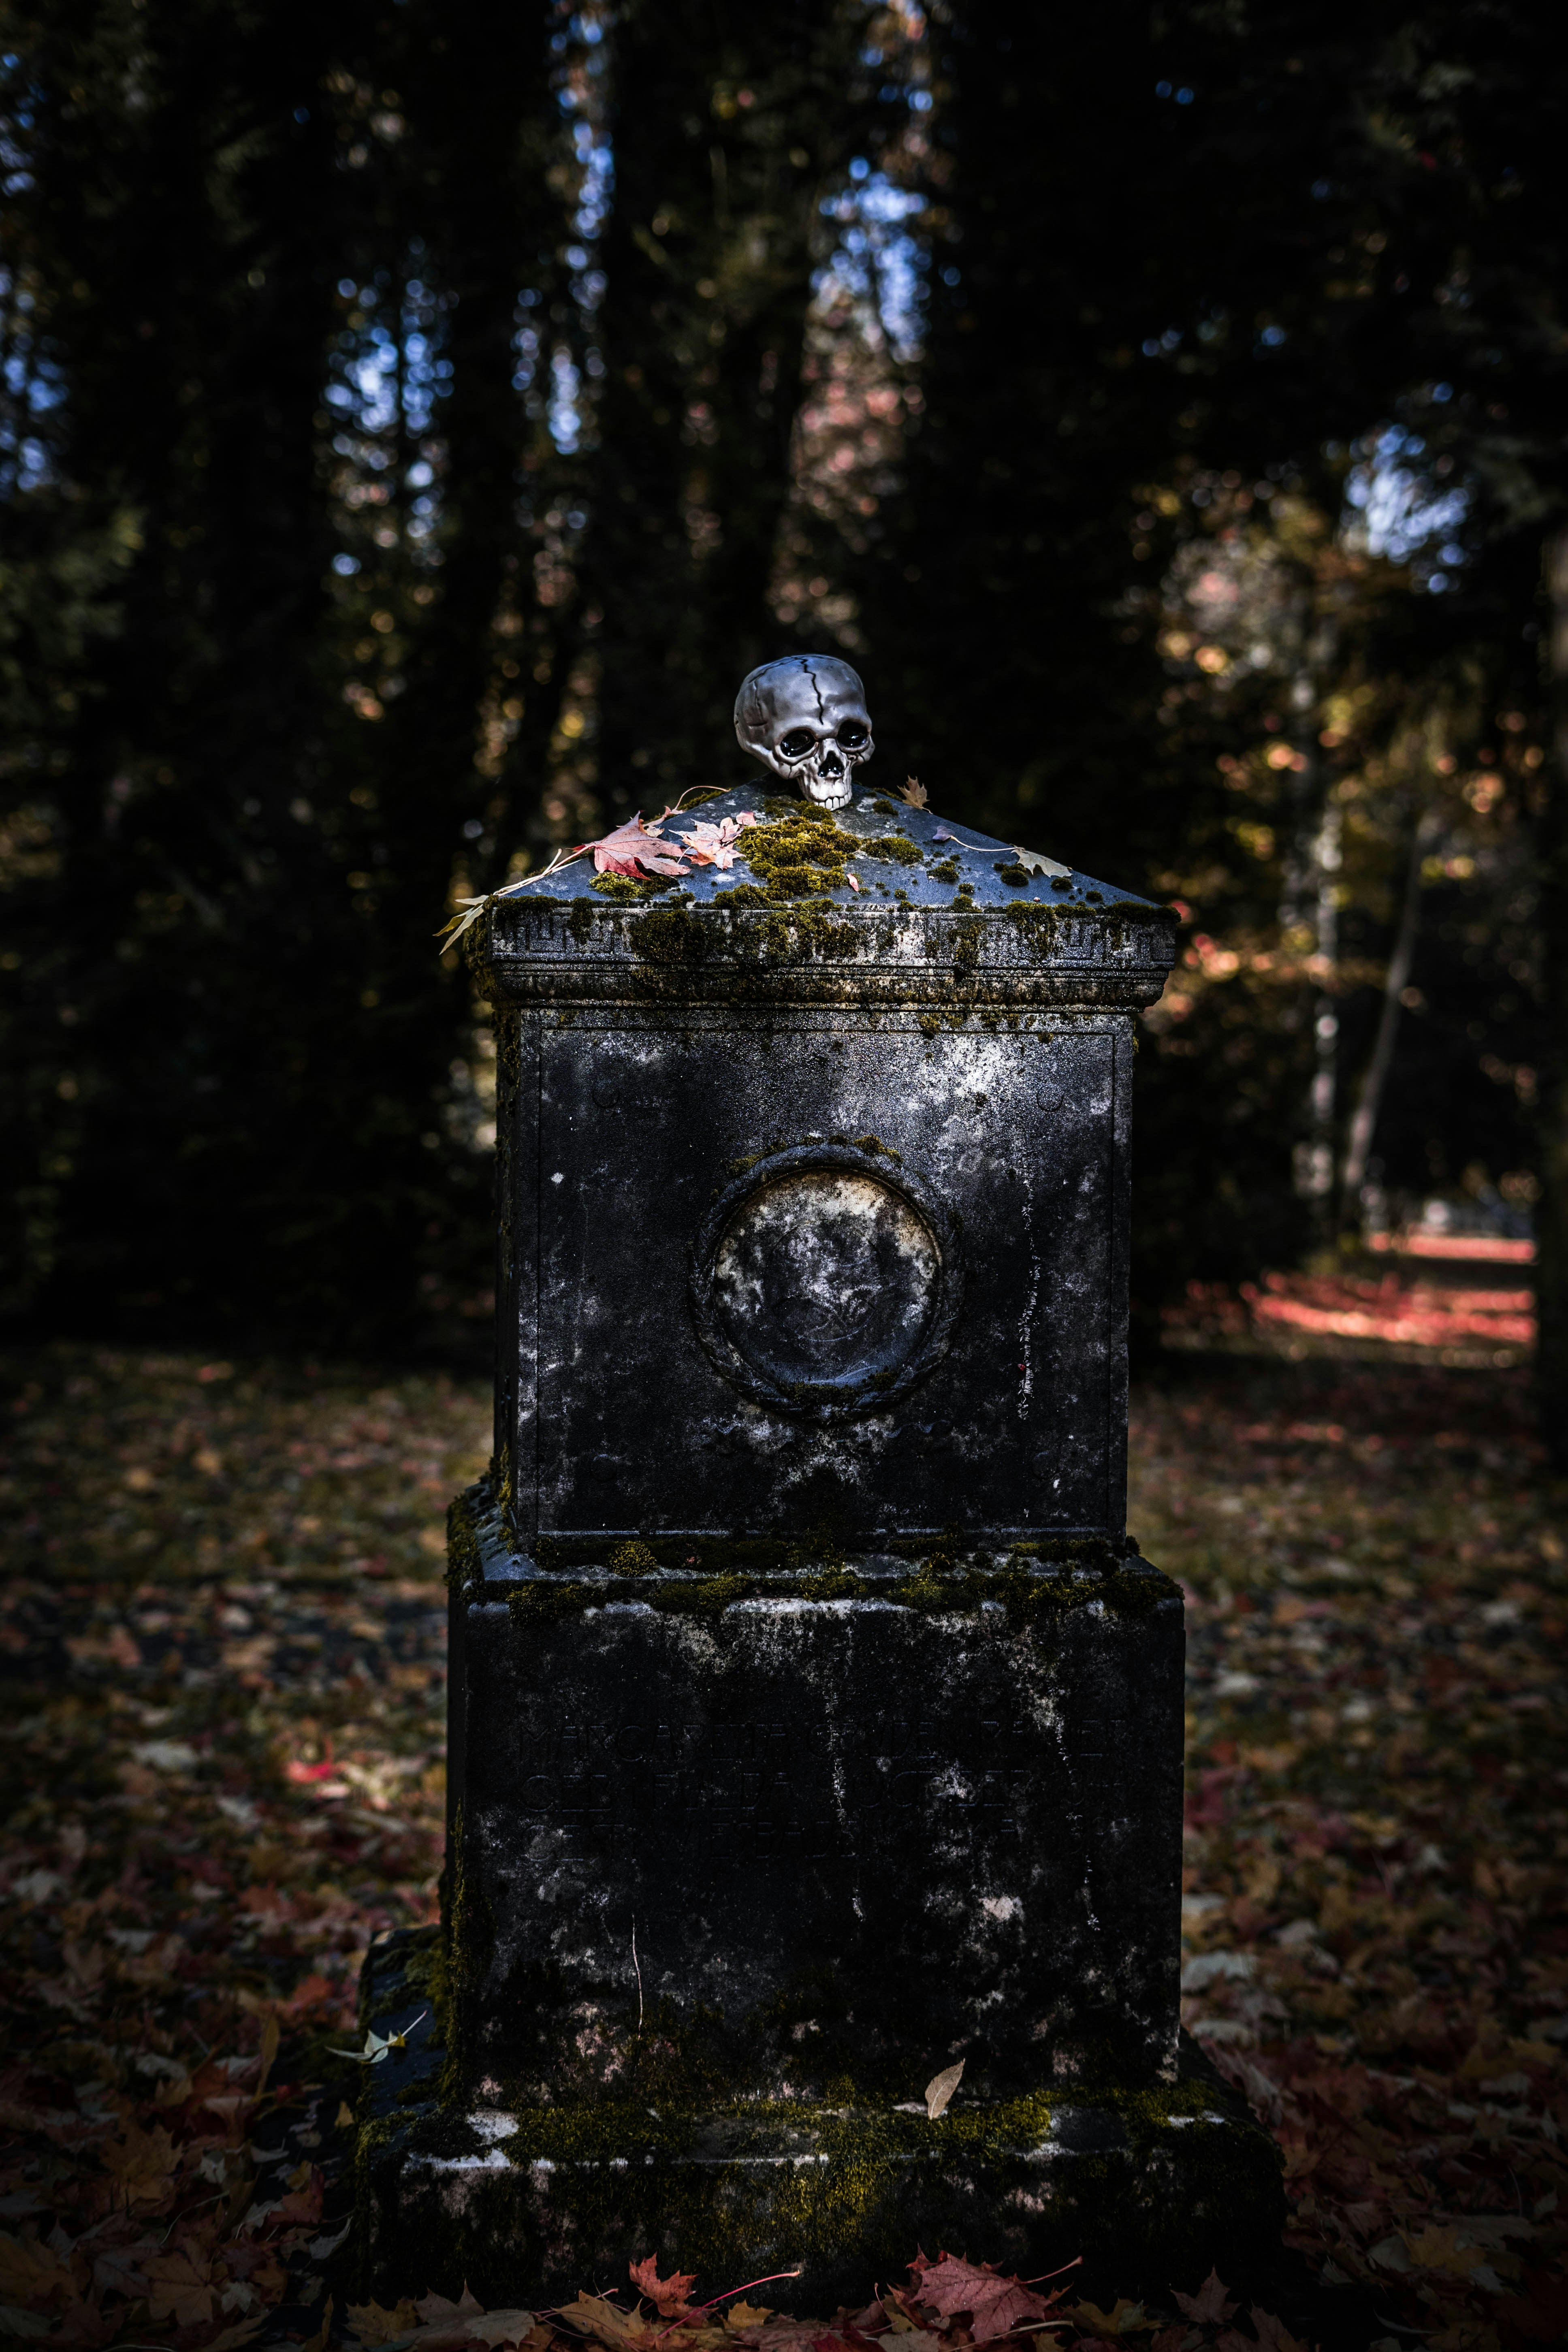 SaaS Investing looks increasingly grim, as seen in this photo of a tombstone with a skull on it in a graveyard.